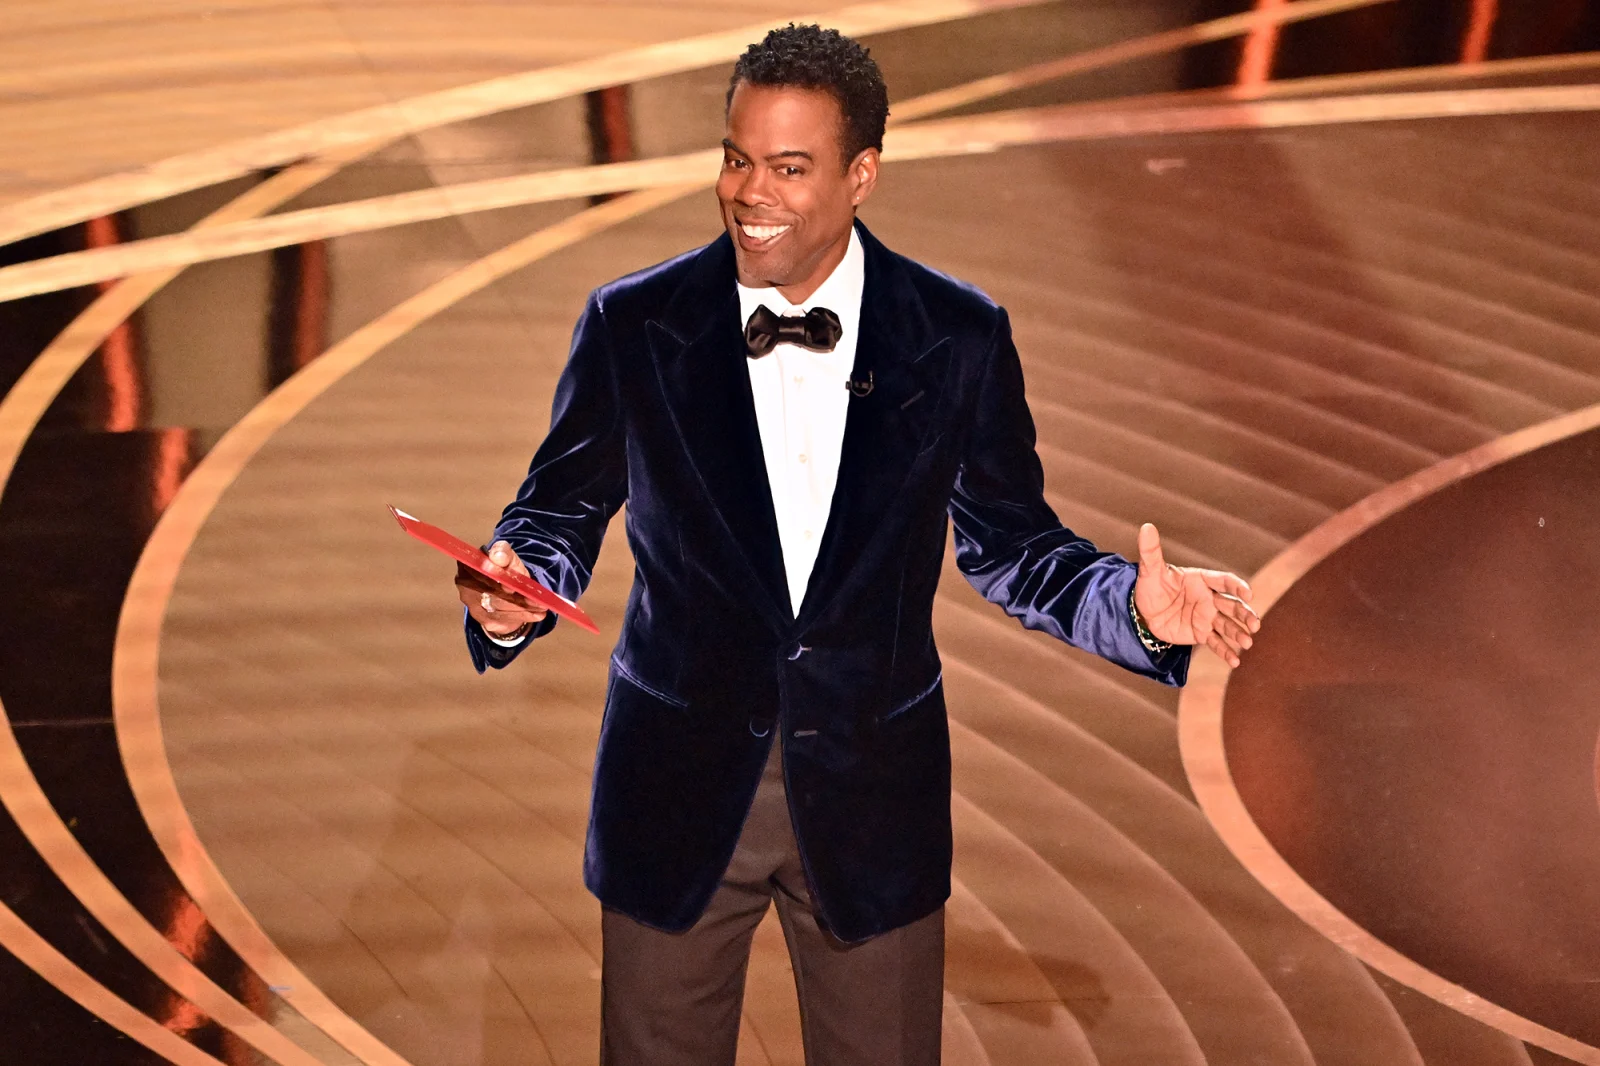 Chris Rock about Will Smith's slap